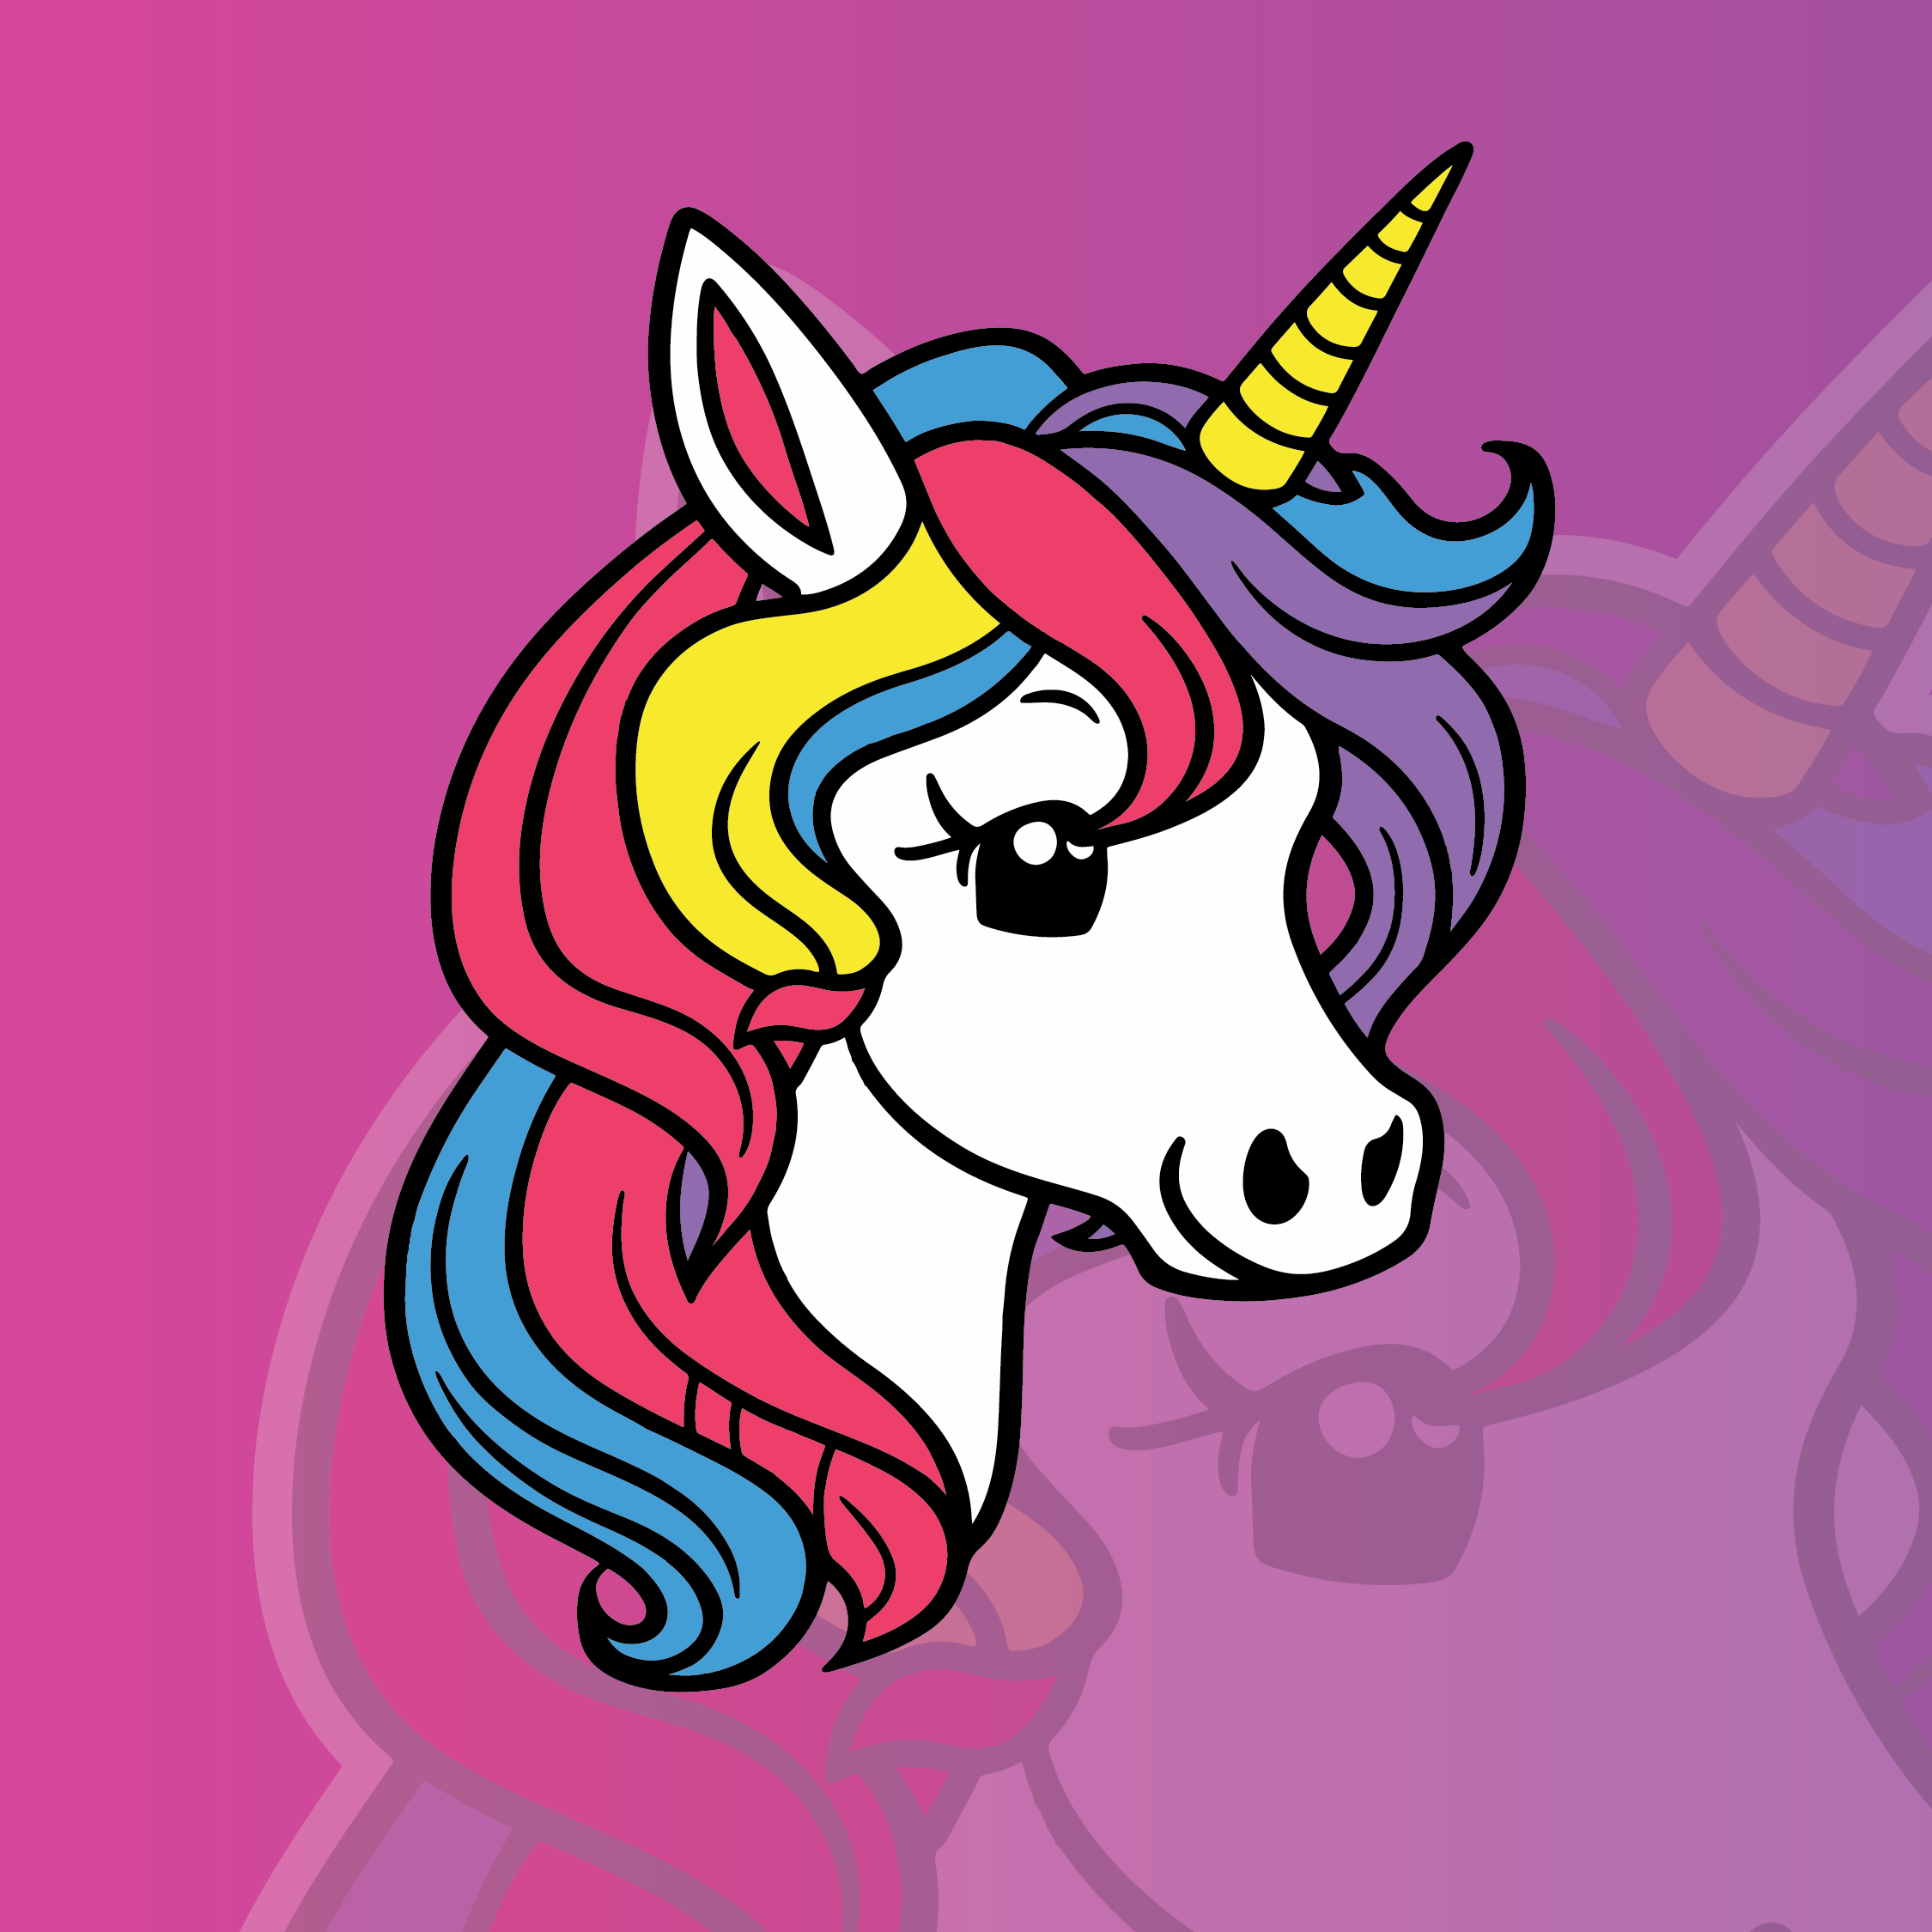 A Colorful Illustration of Unicorn preview image.